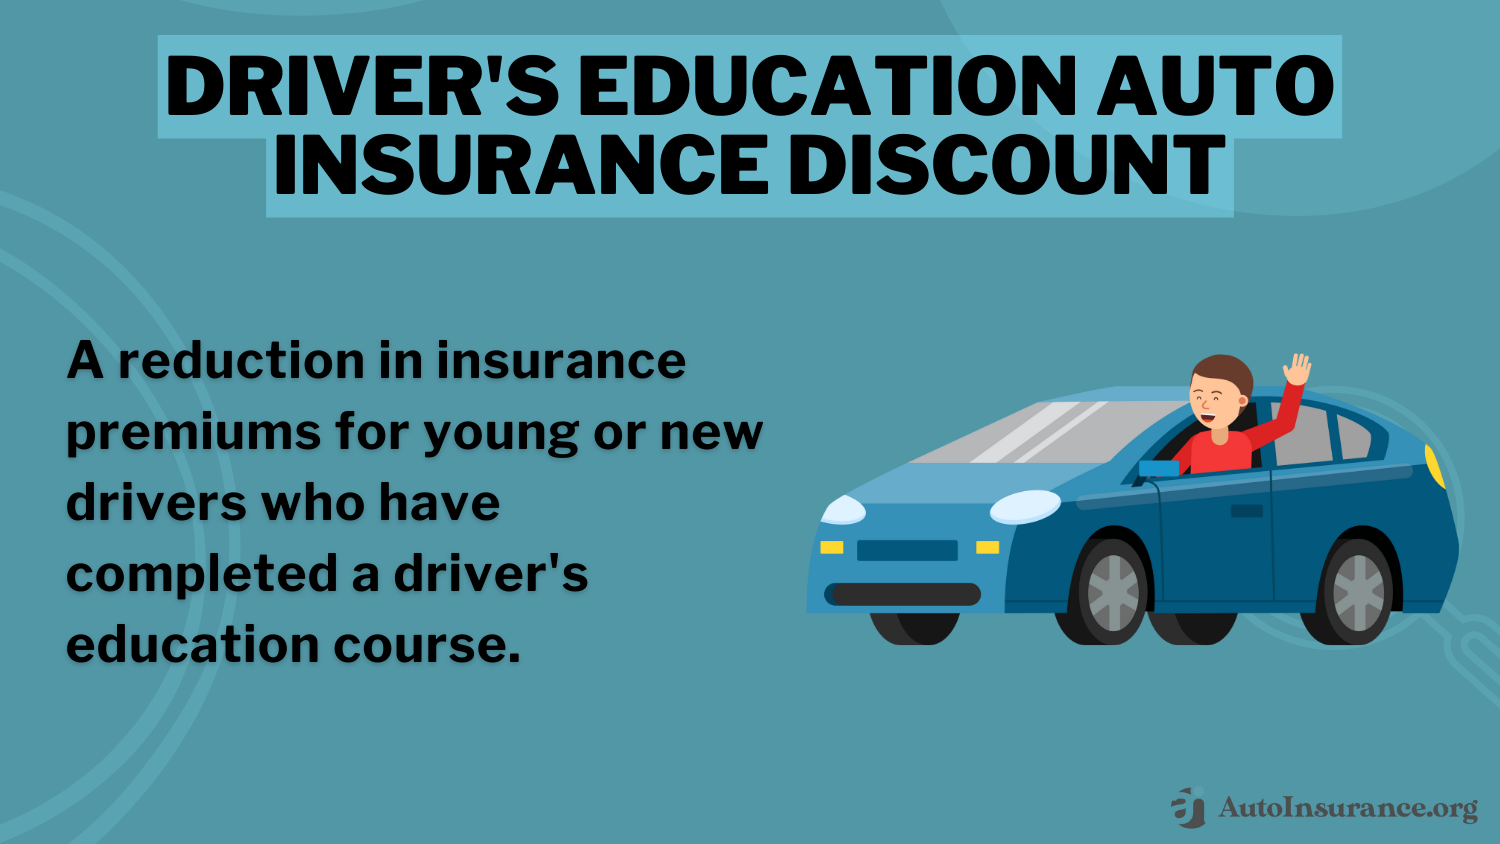 How to Help Teen Drivers Get Their First License: Driver's Education Auto Insurance Discount Definition Card